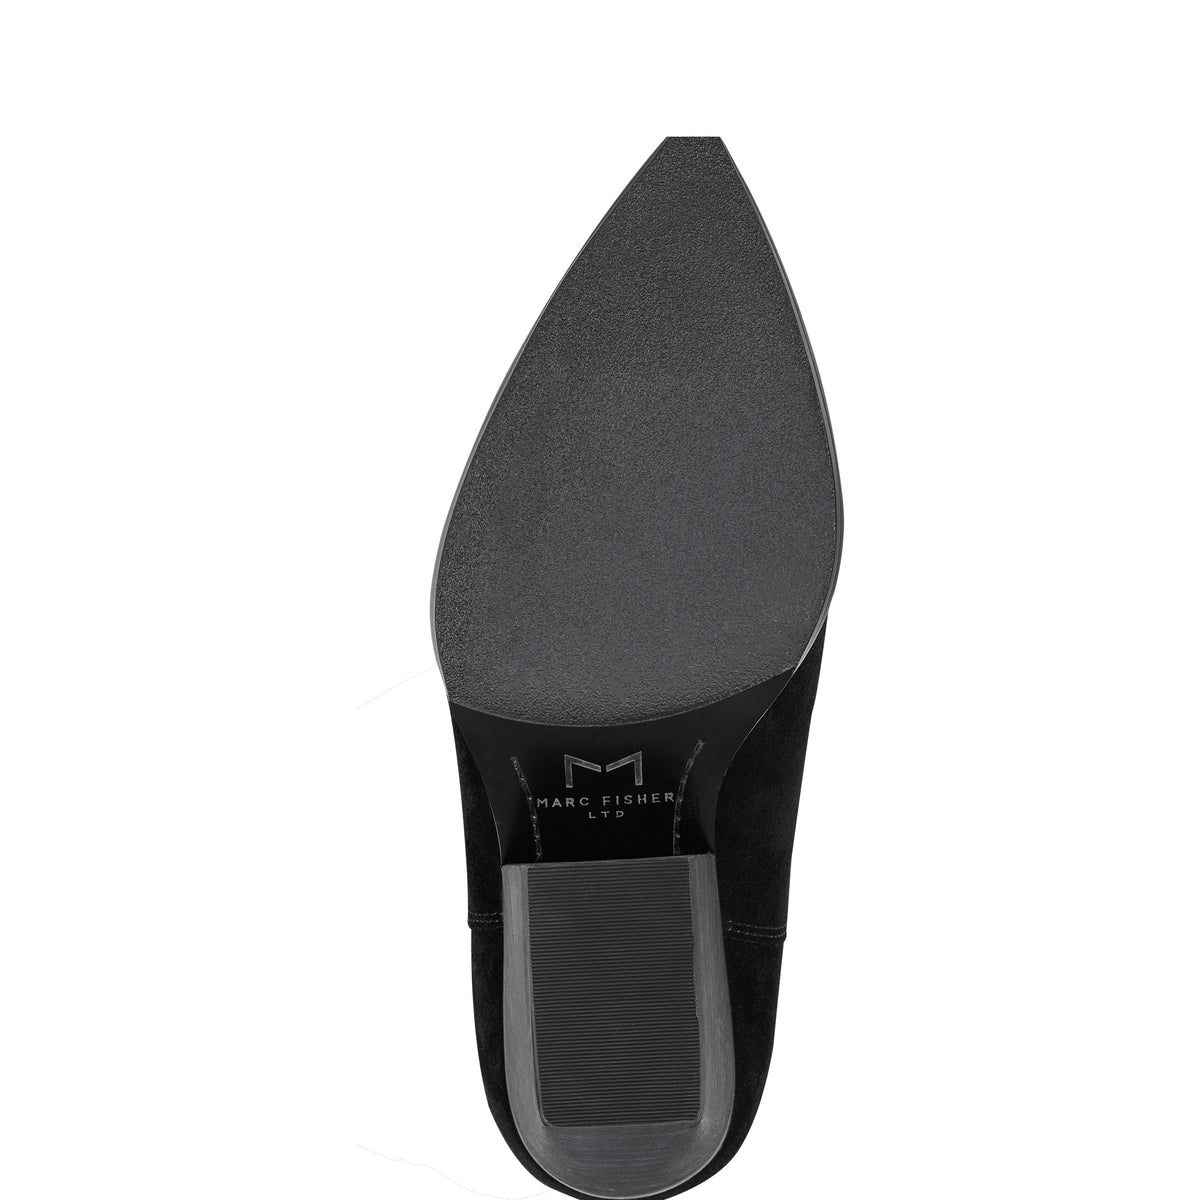 Challi Pointy Toe Boot